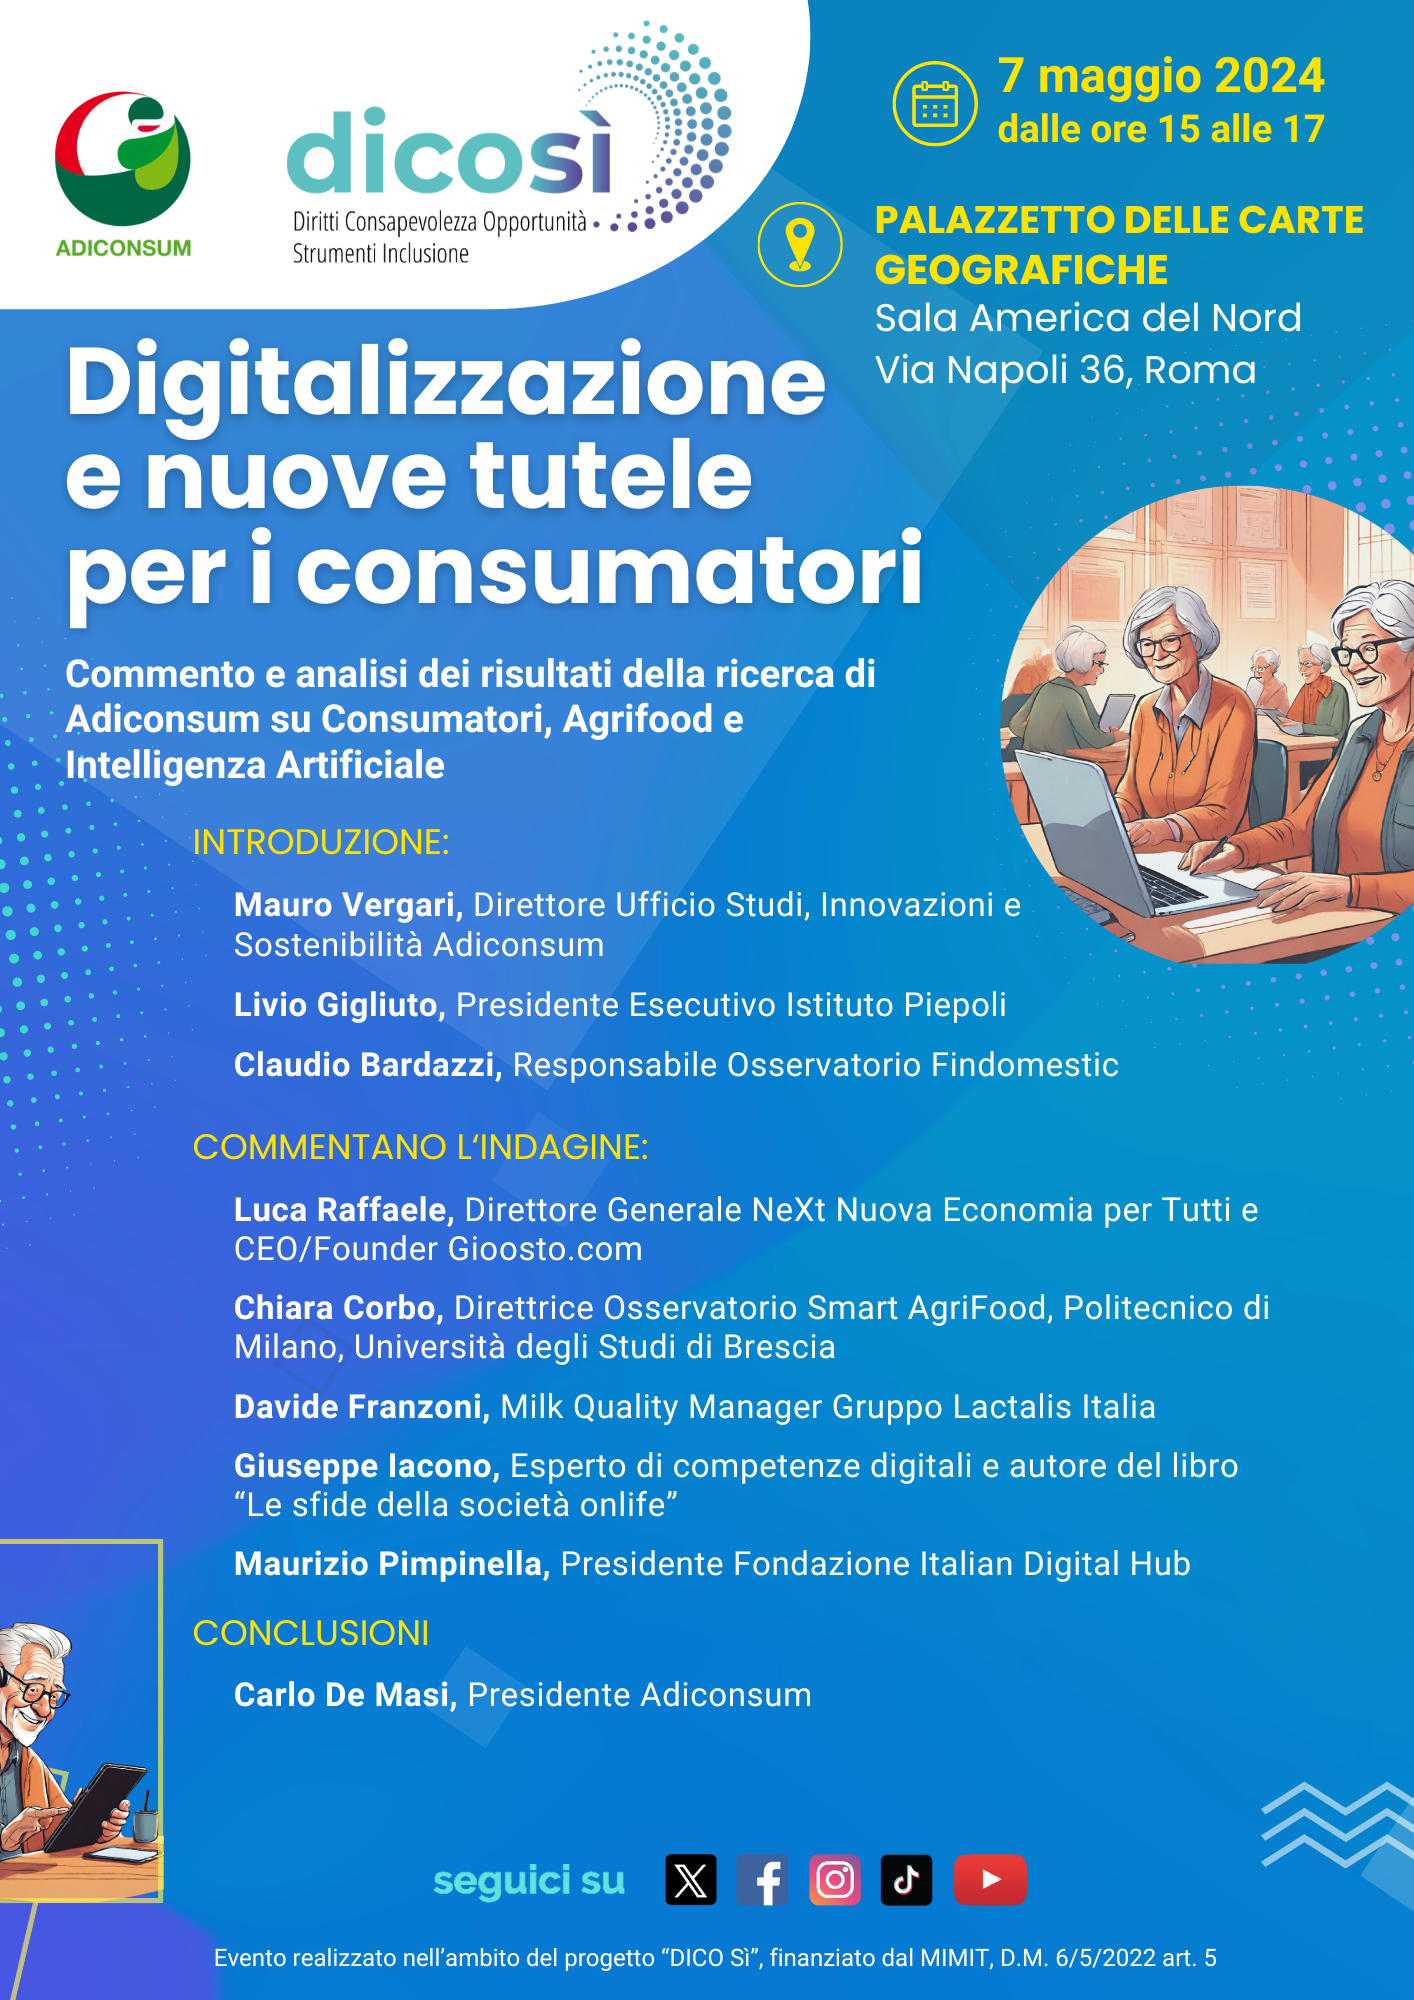 https://www.adiconsum.it/wp-content/uploads/2024/04/Save-the-date_Dico-si_7-maggio-2.png